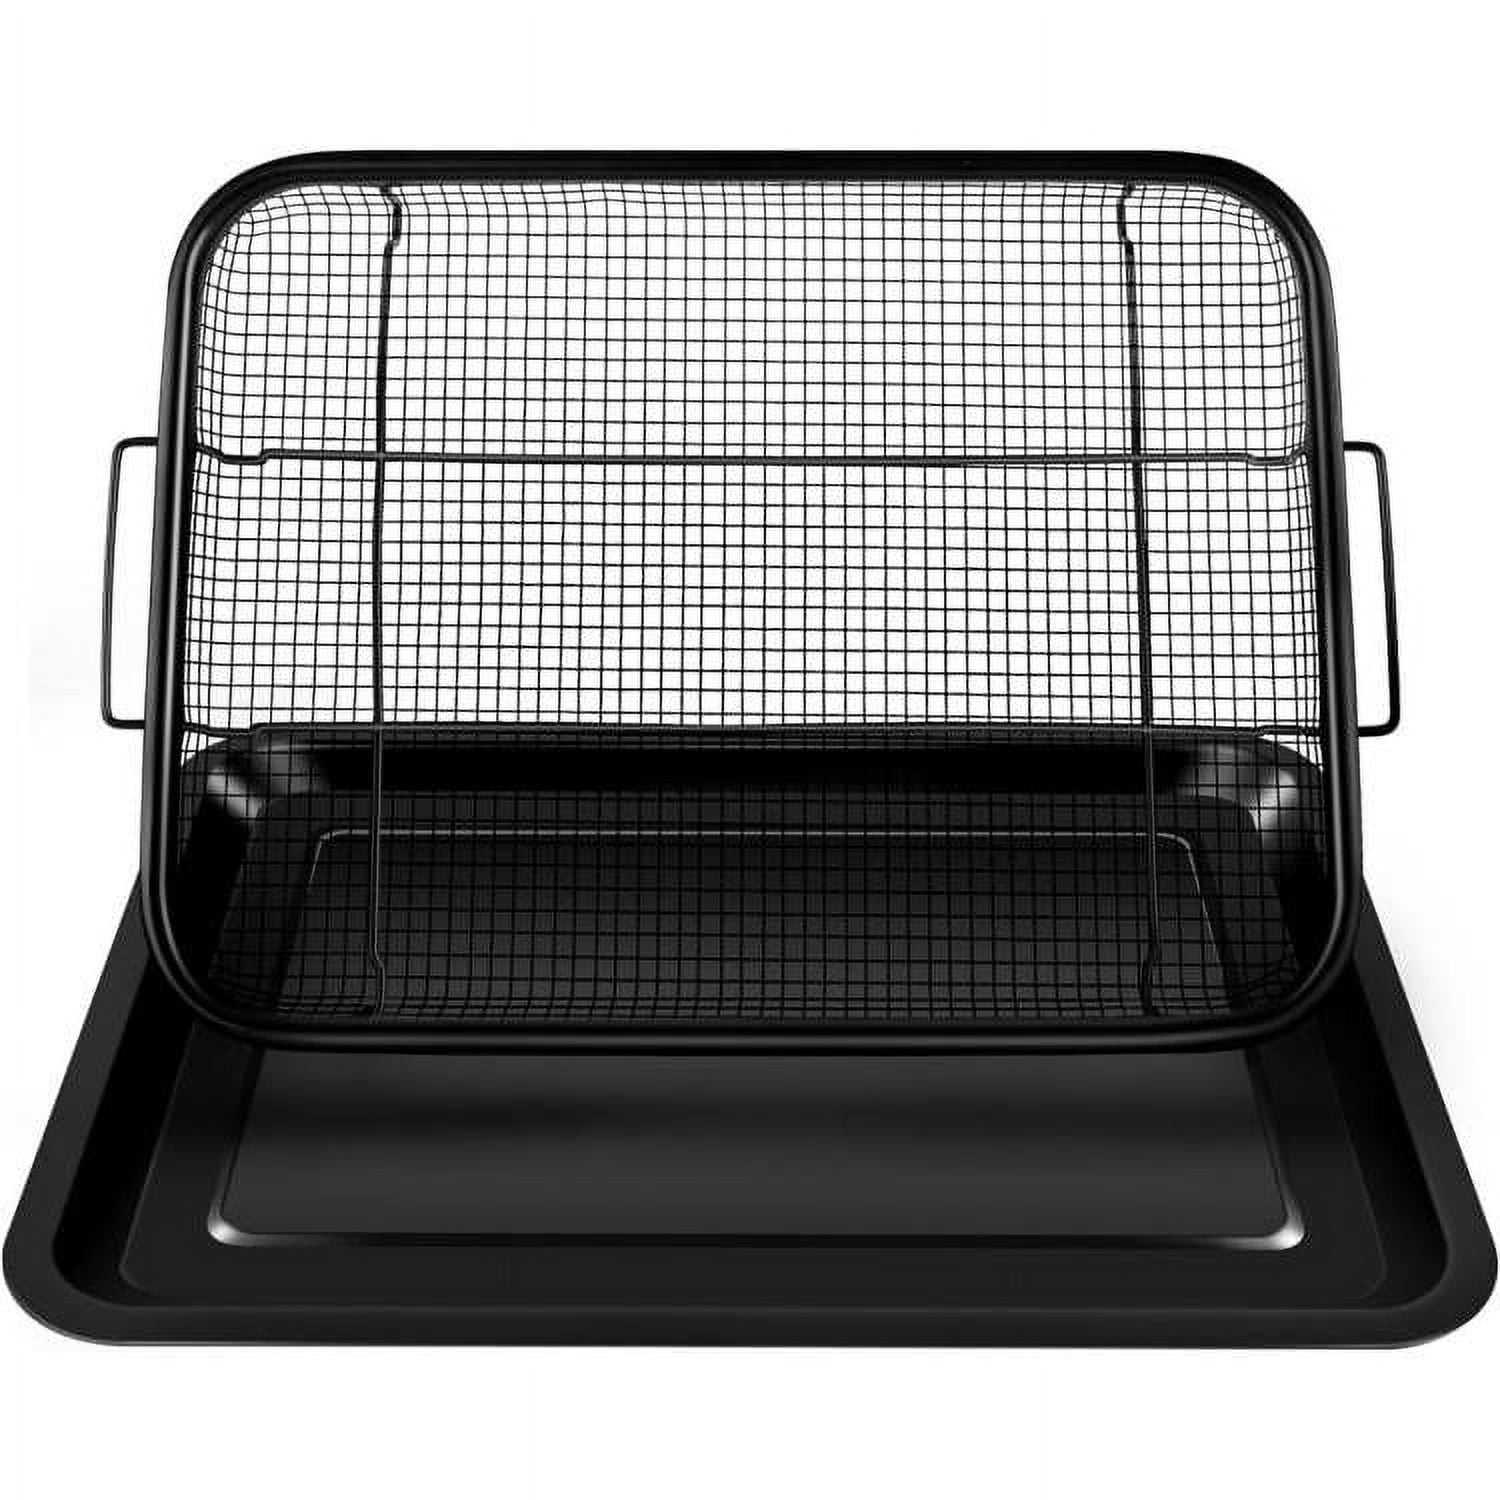 Eyourlife 2 Piece Large Air Fryer Basket for Oven, 15 x 11 Inch Stainless  Steel Crisper Tray and Basket for Oven, Oven Air Fry Mesh Basket Set, Oven